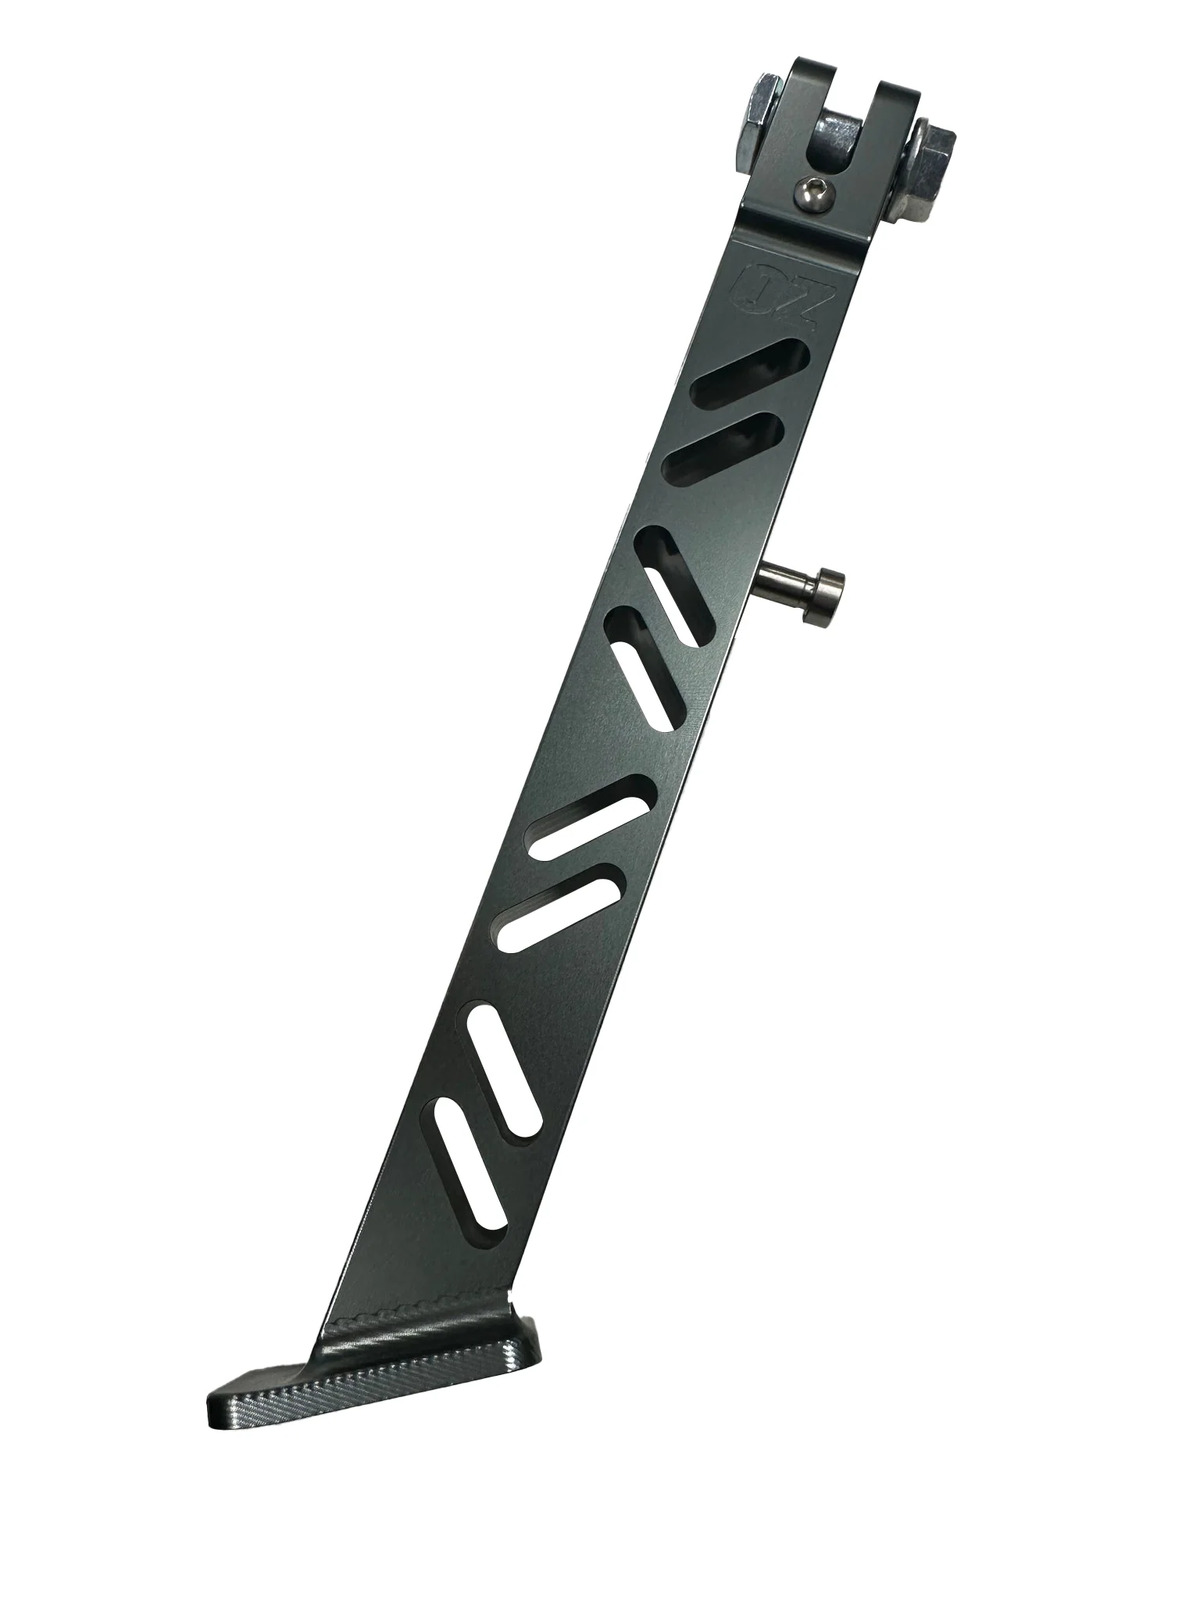 Ozminis CRF110F Extended Kickstand